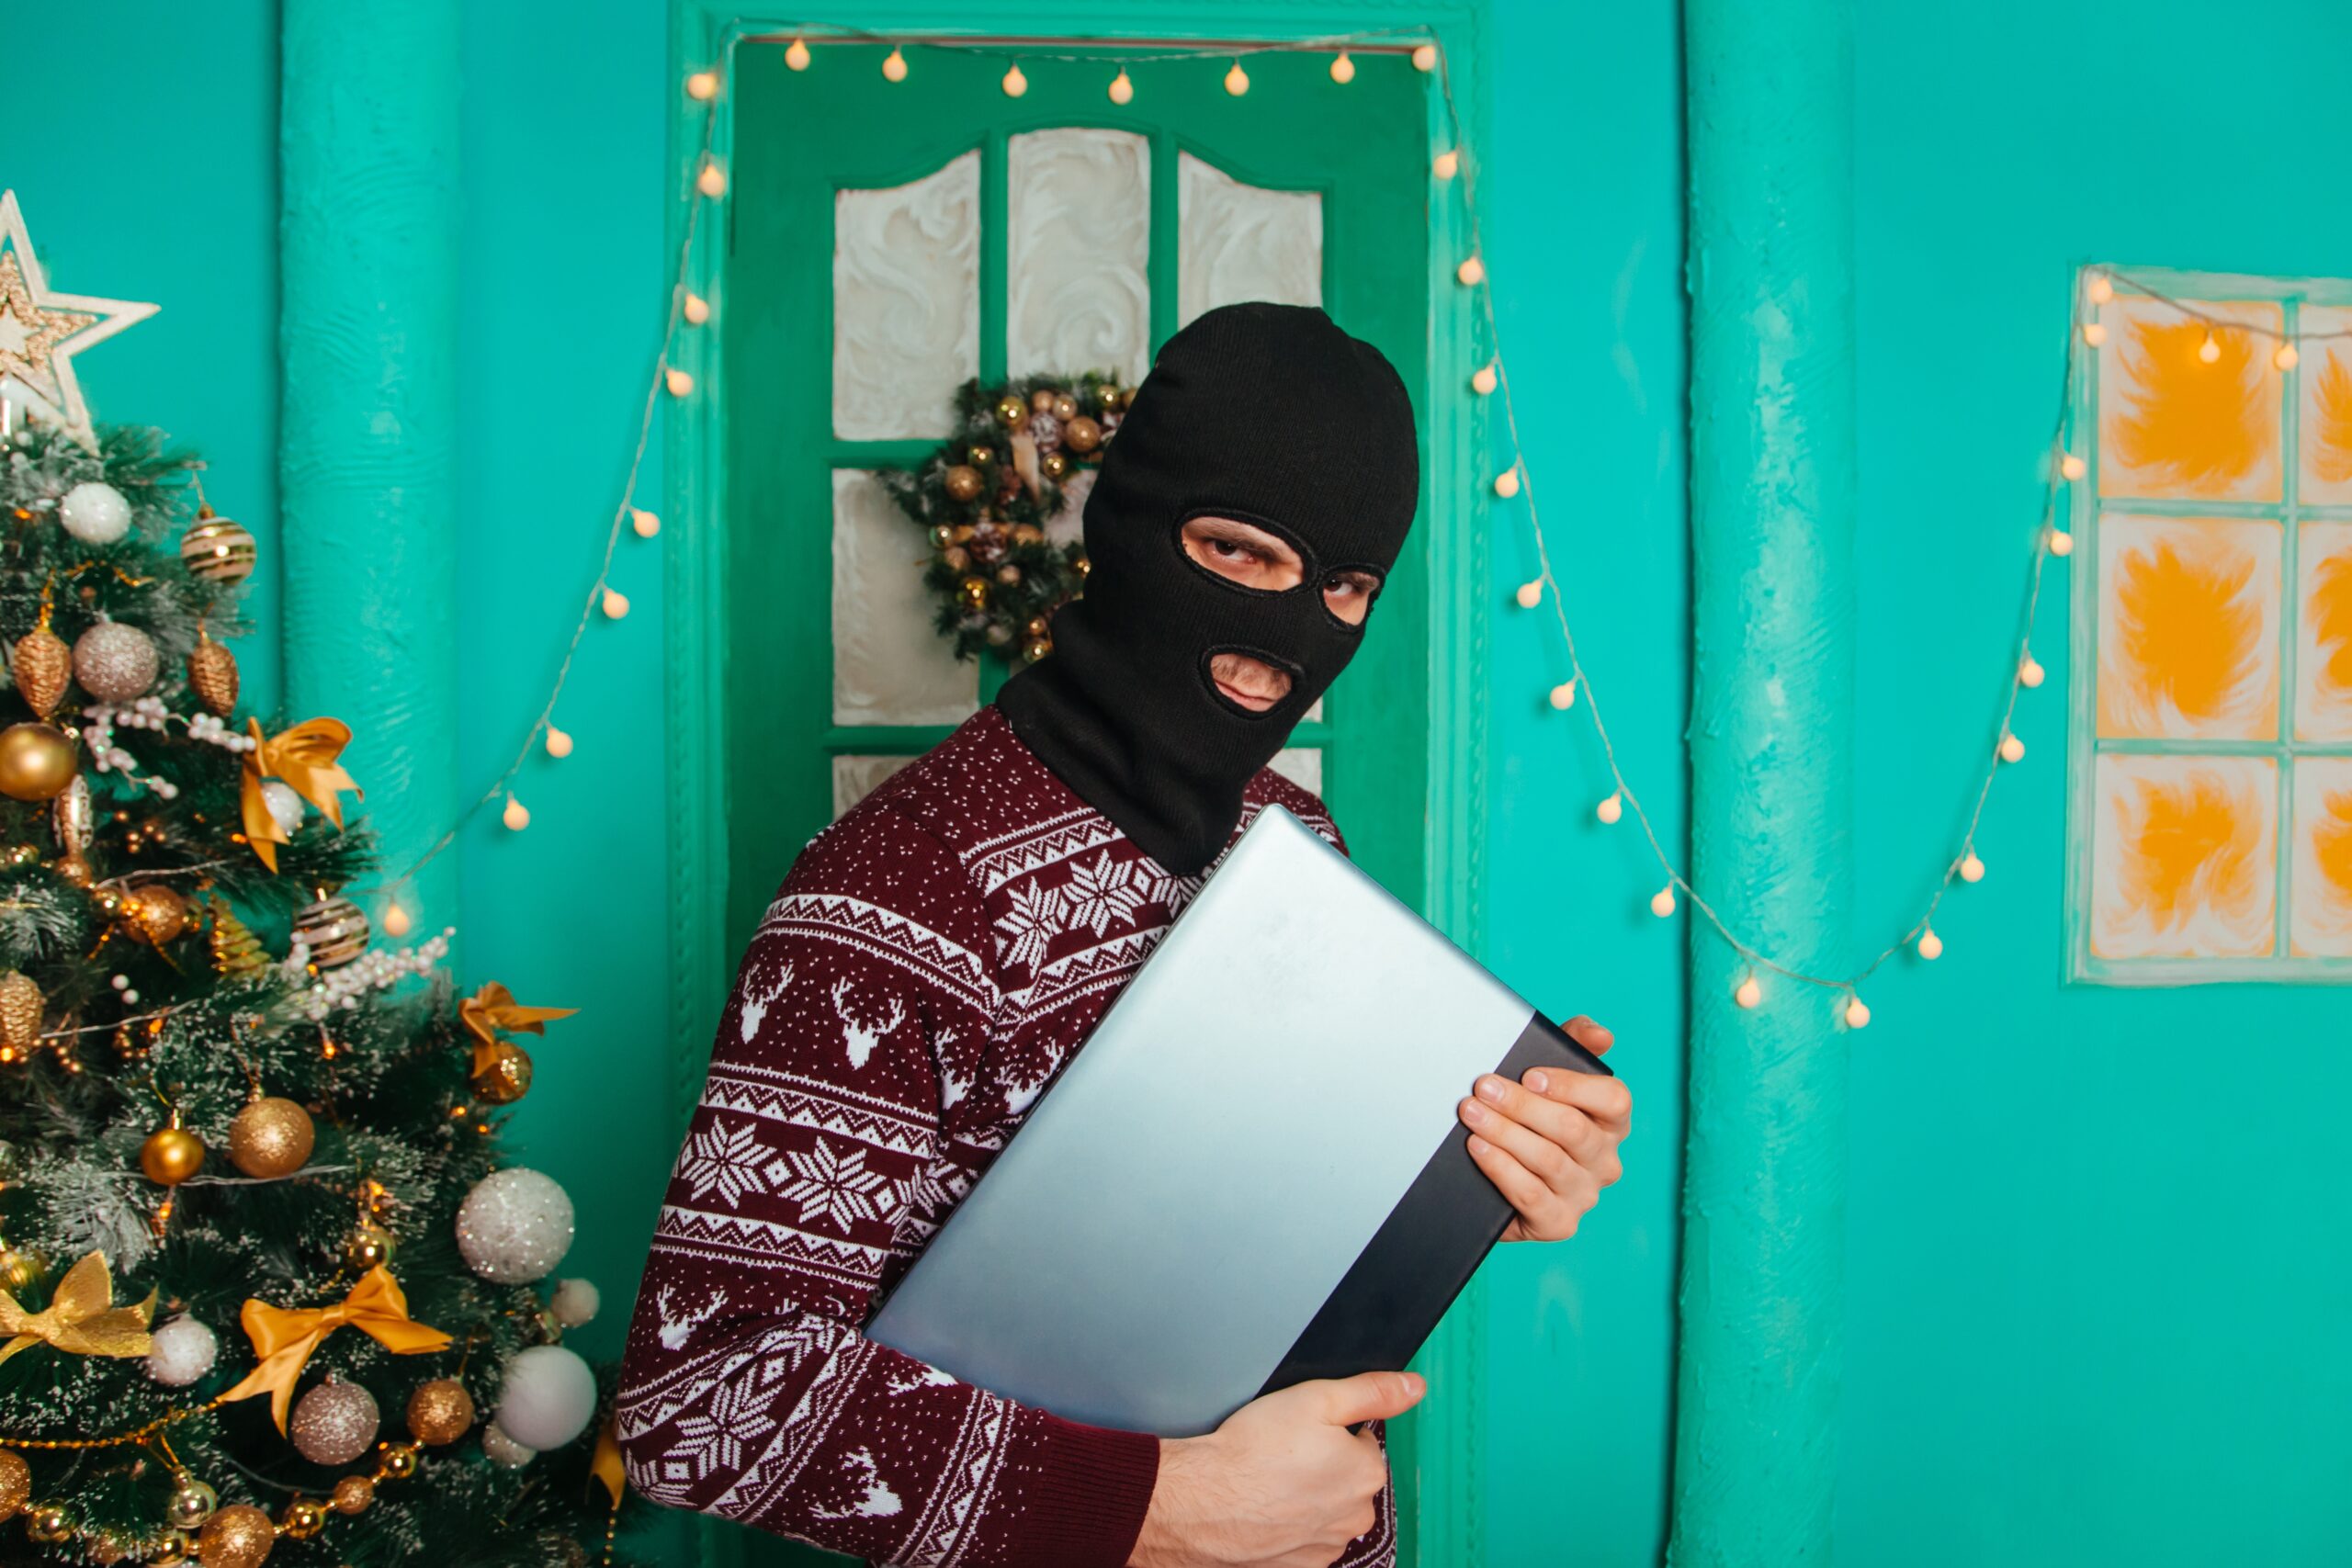 It’s the season of giving, but for scammers, it’s the season of taking.